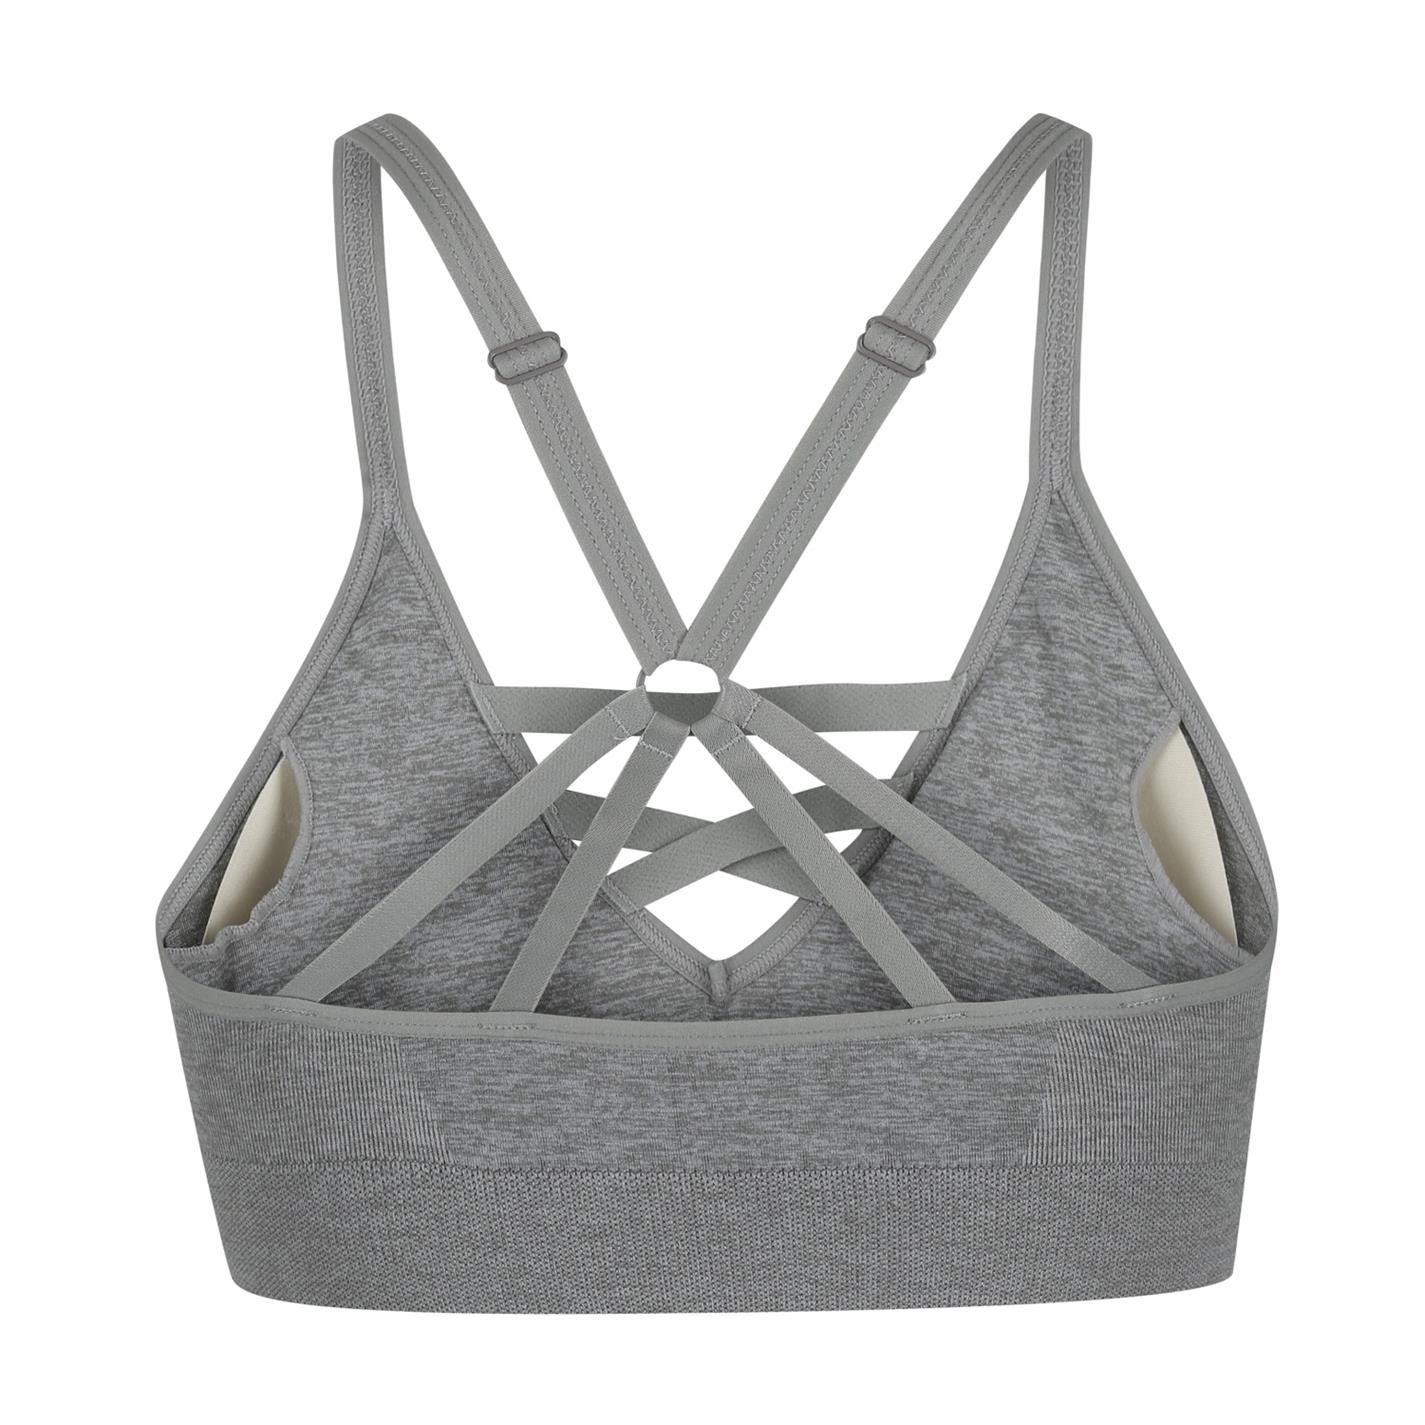 Reebok Terri SL Bra Crafted with a v-neckline that has extra straps across the front, some adjustable multi-strap racer-back bra straps and an elasticated under-band for a comfortable wear. Finished with removable padding to the cups for extra comfort along with the signature Reebok branding that completes the look. Do not miss out on this one.